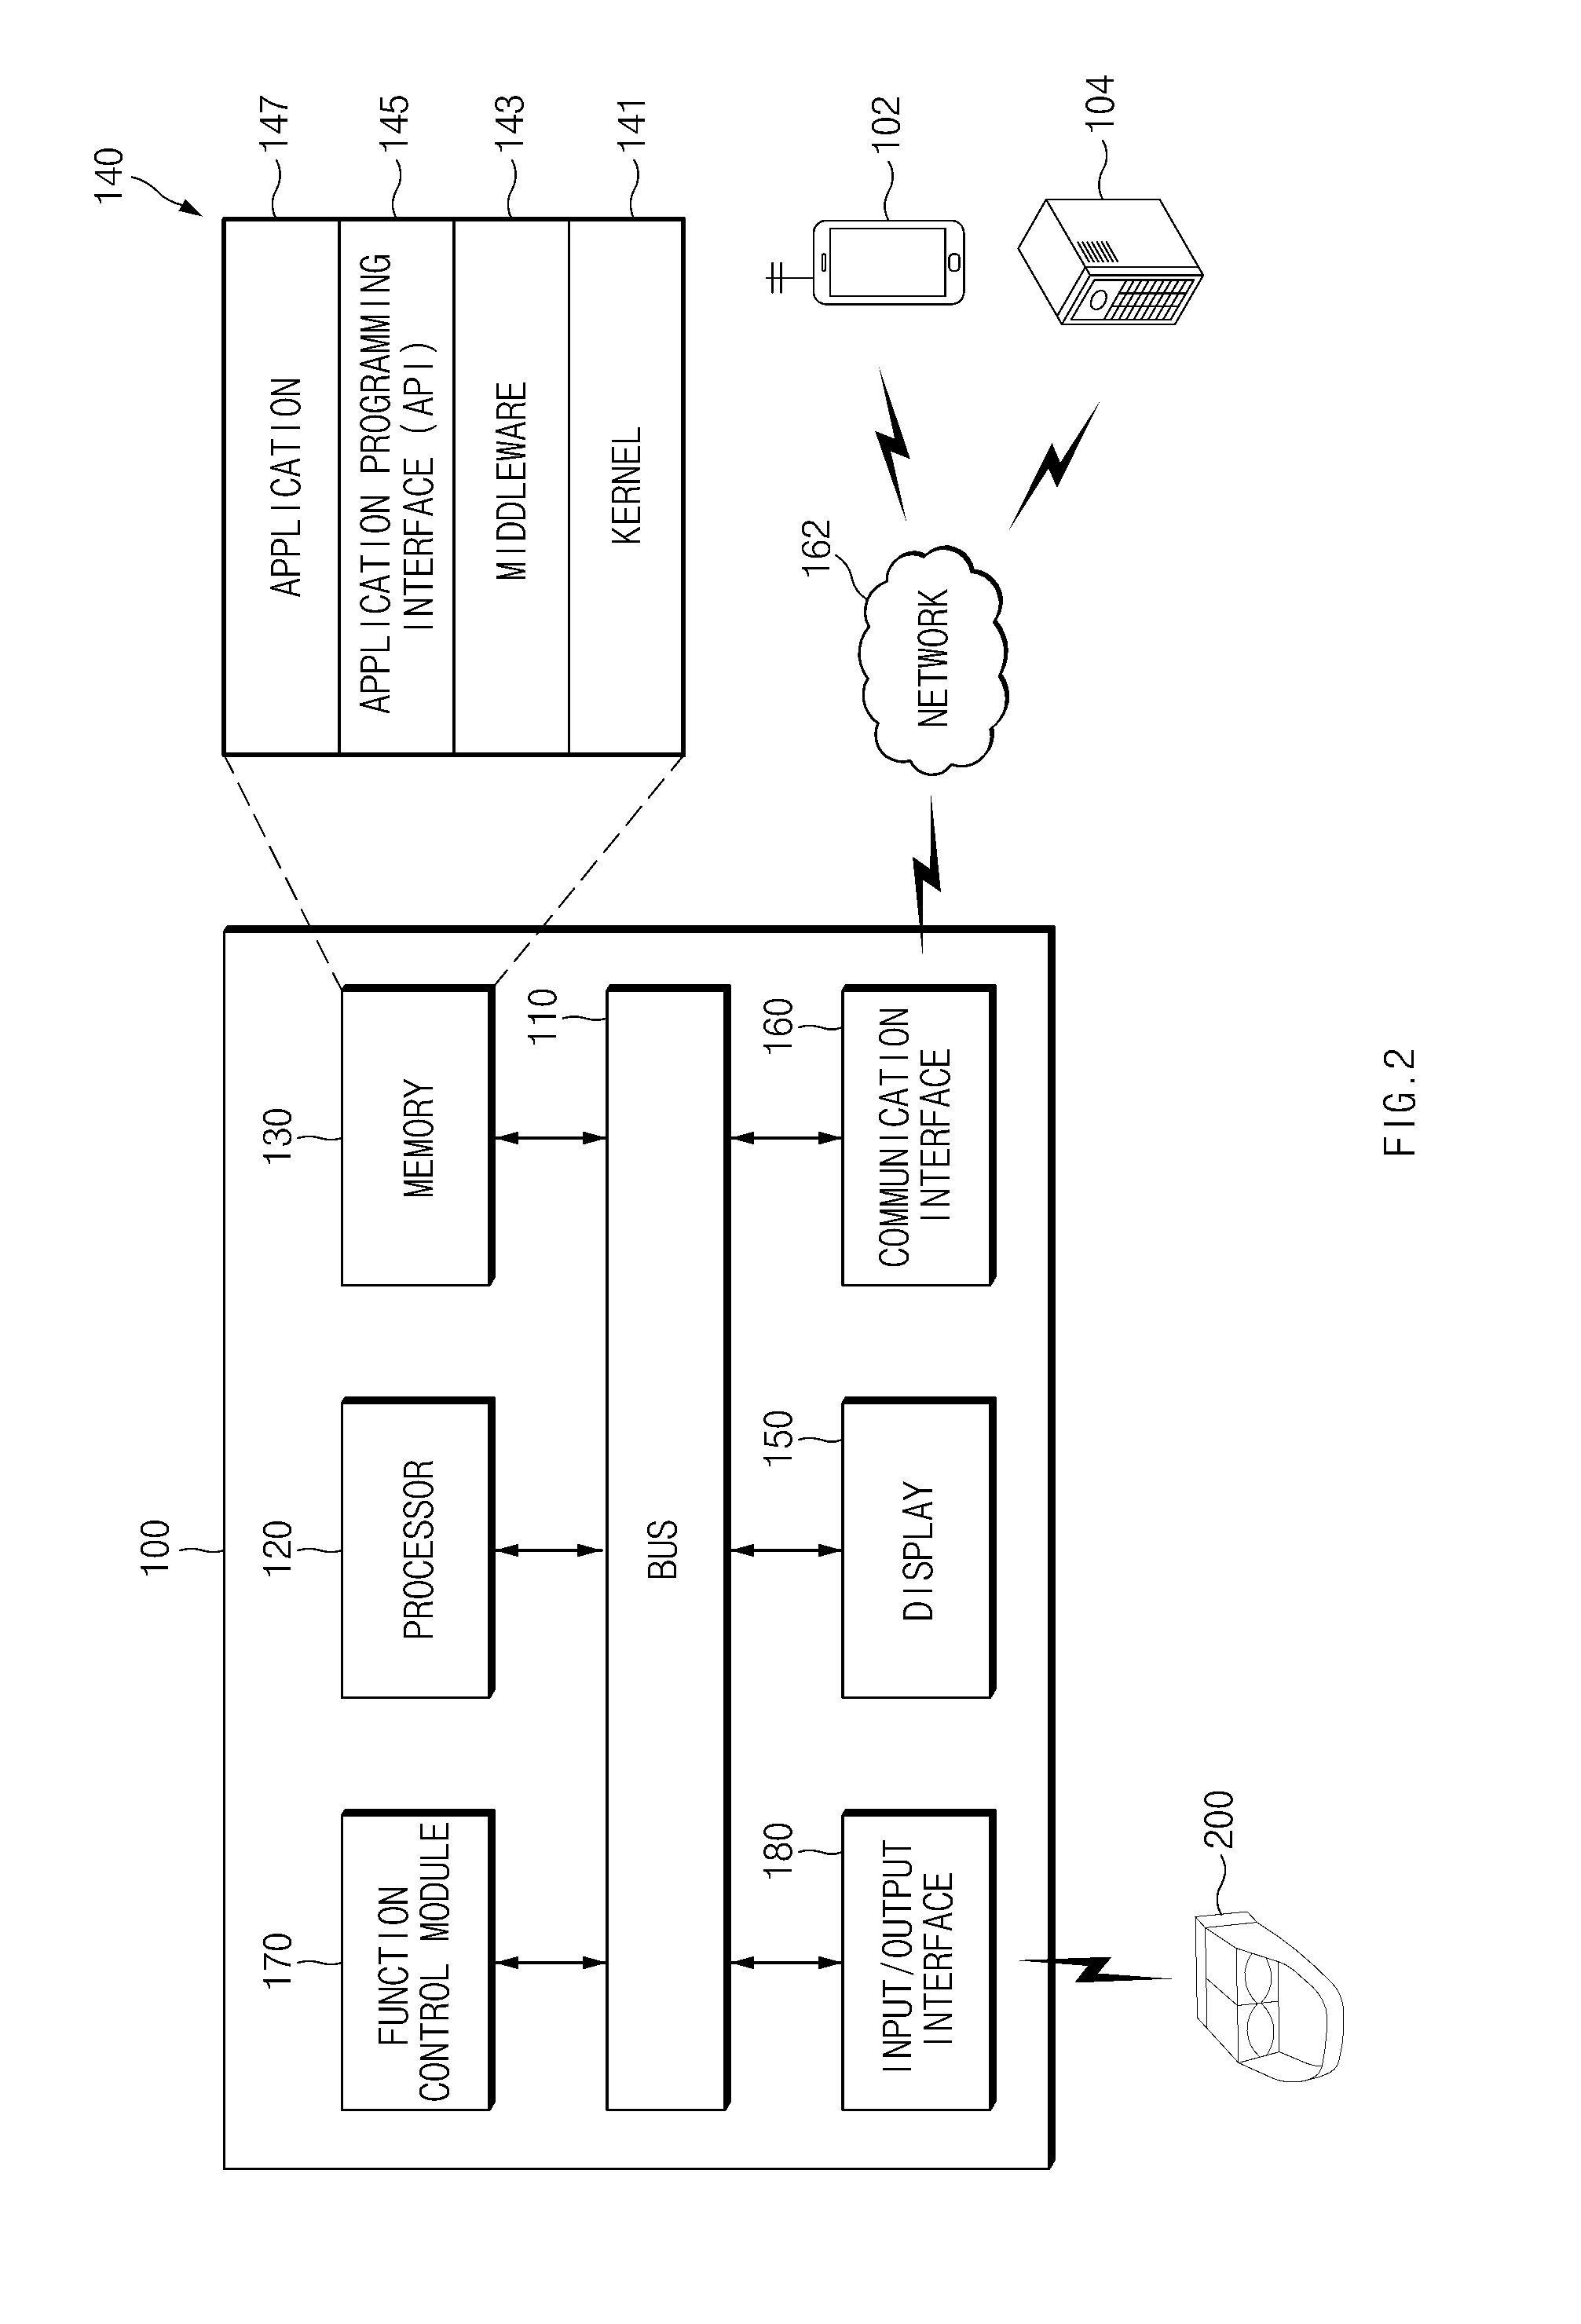 Processing method of a communication function and electronic device supporting the same